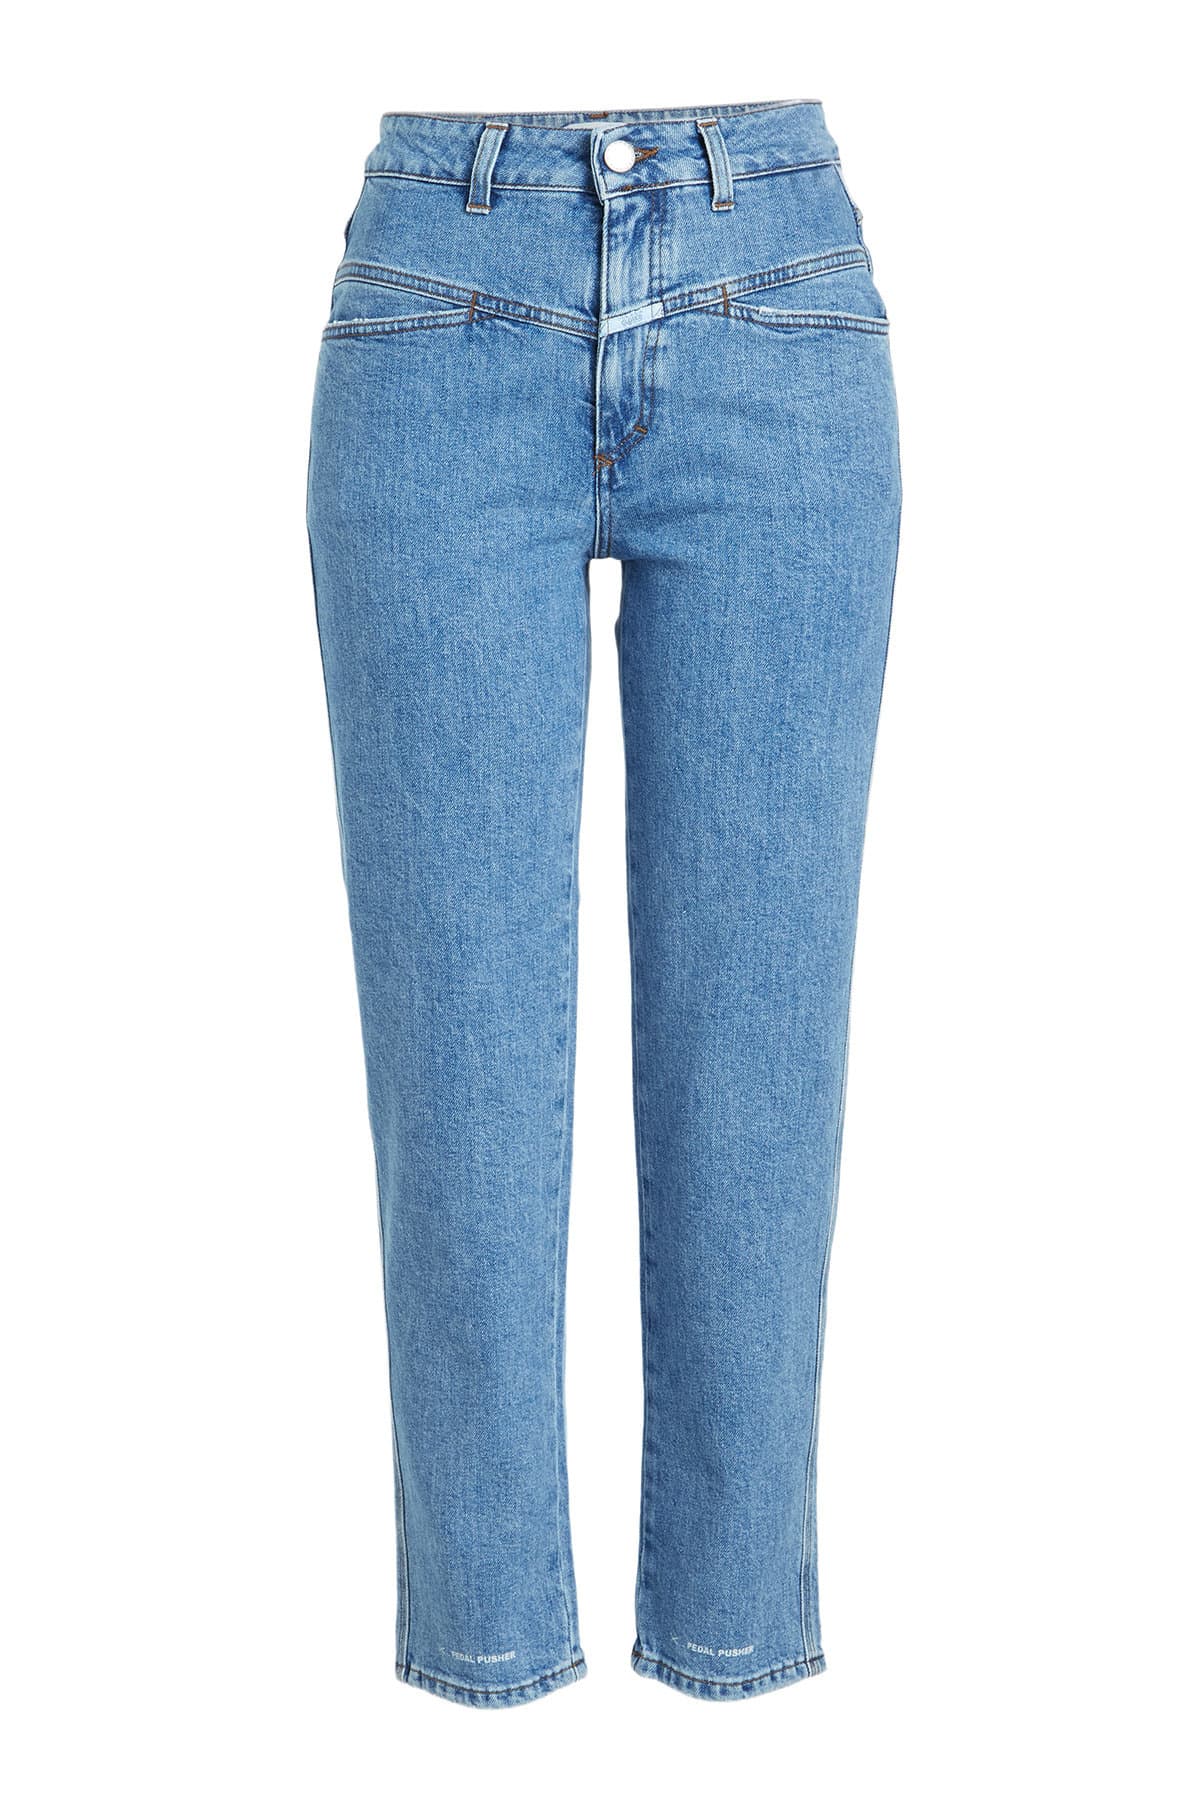 Closed - Pedal Pusher Cropped Jeans